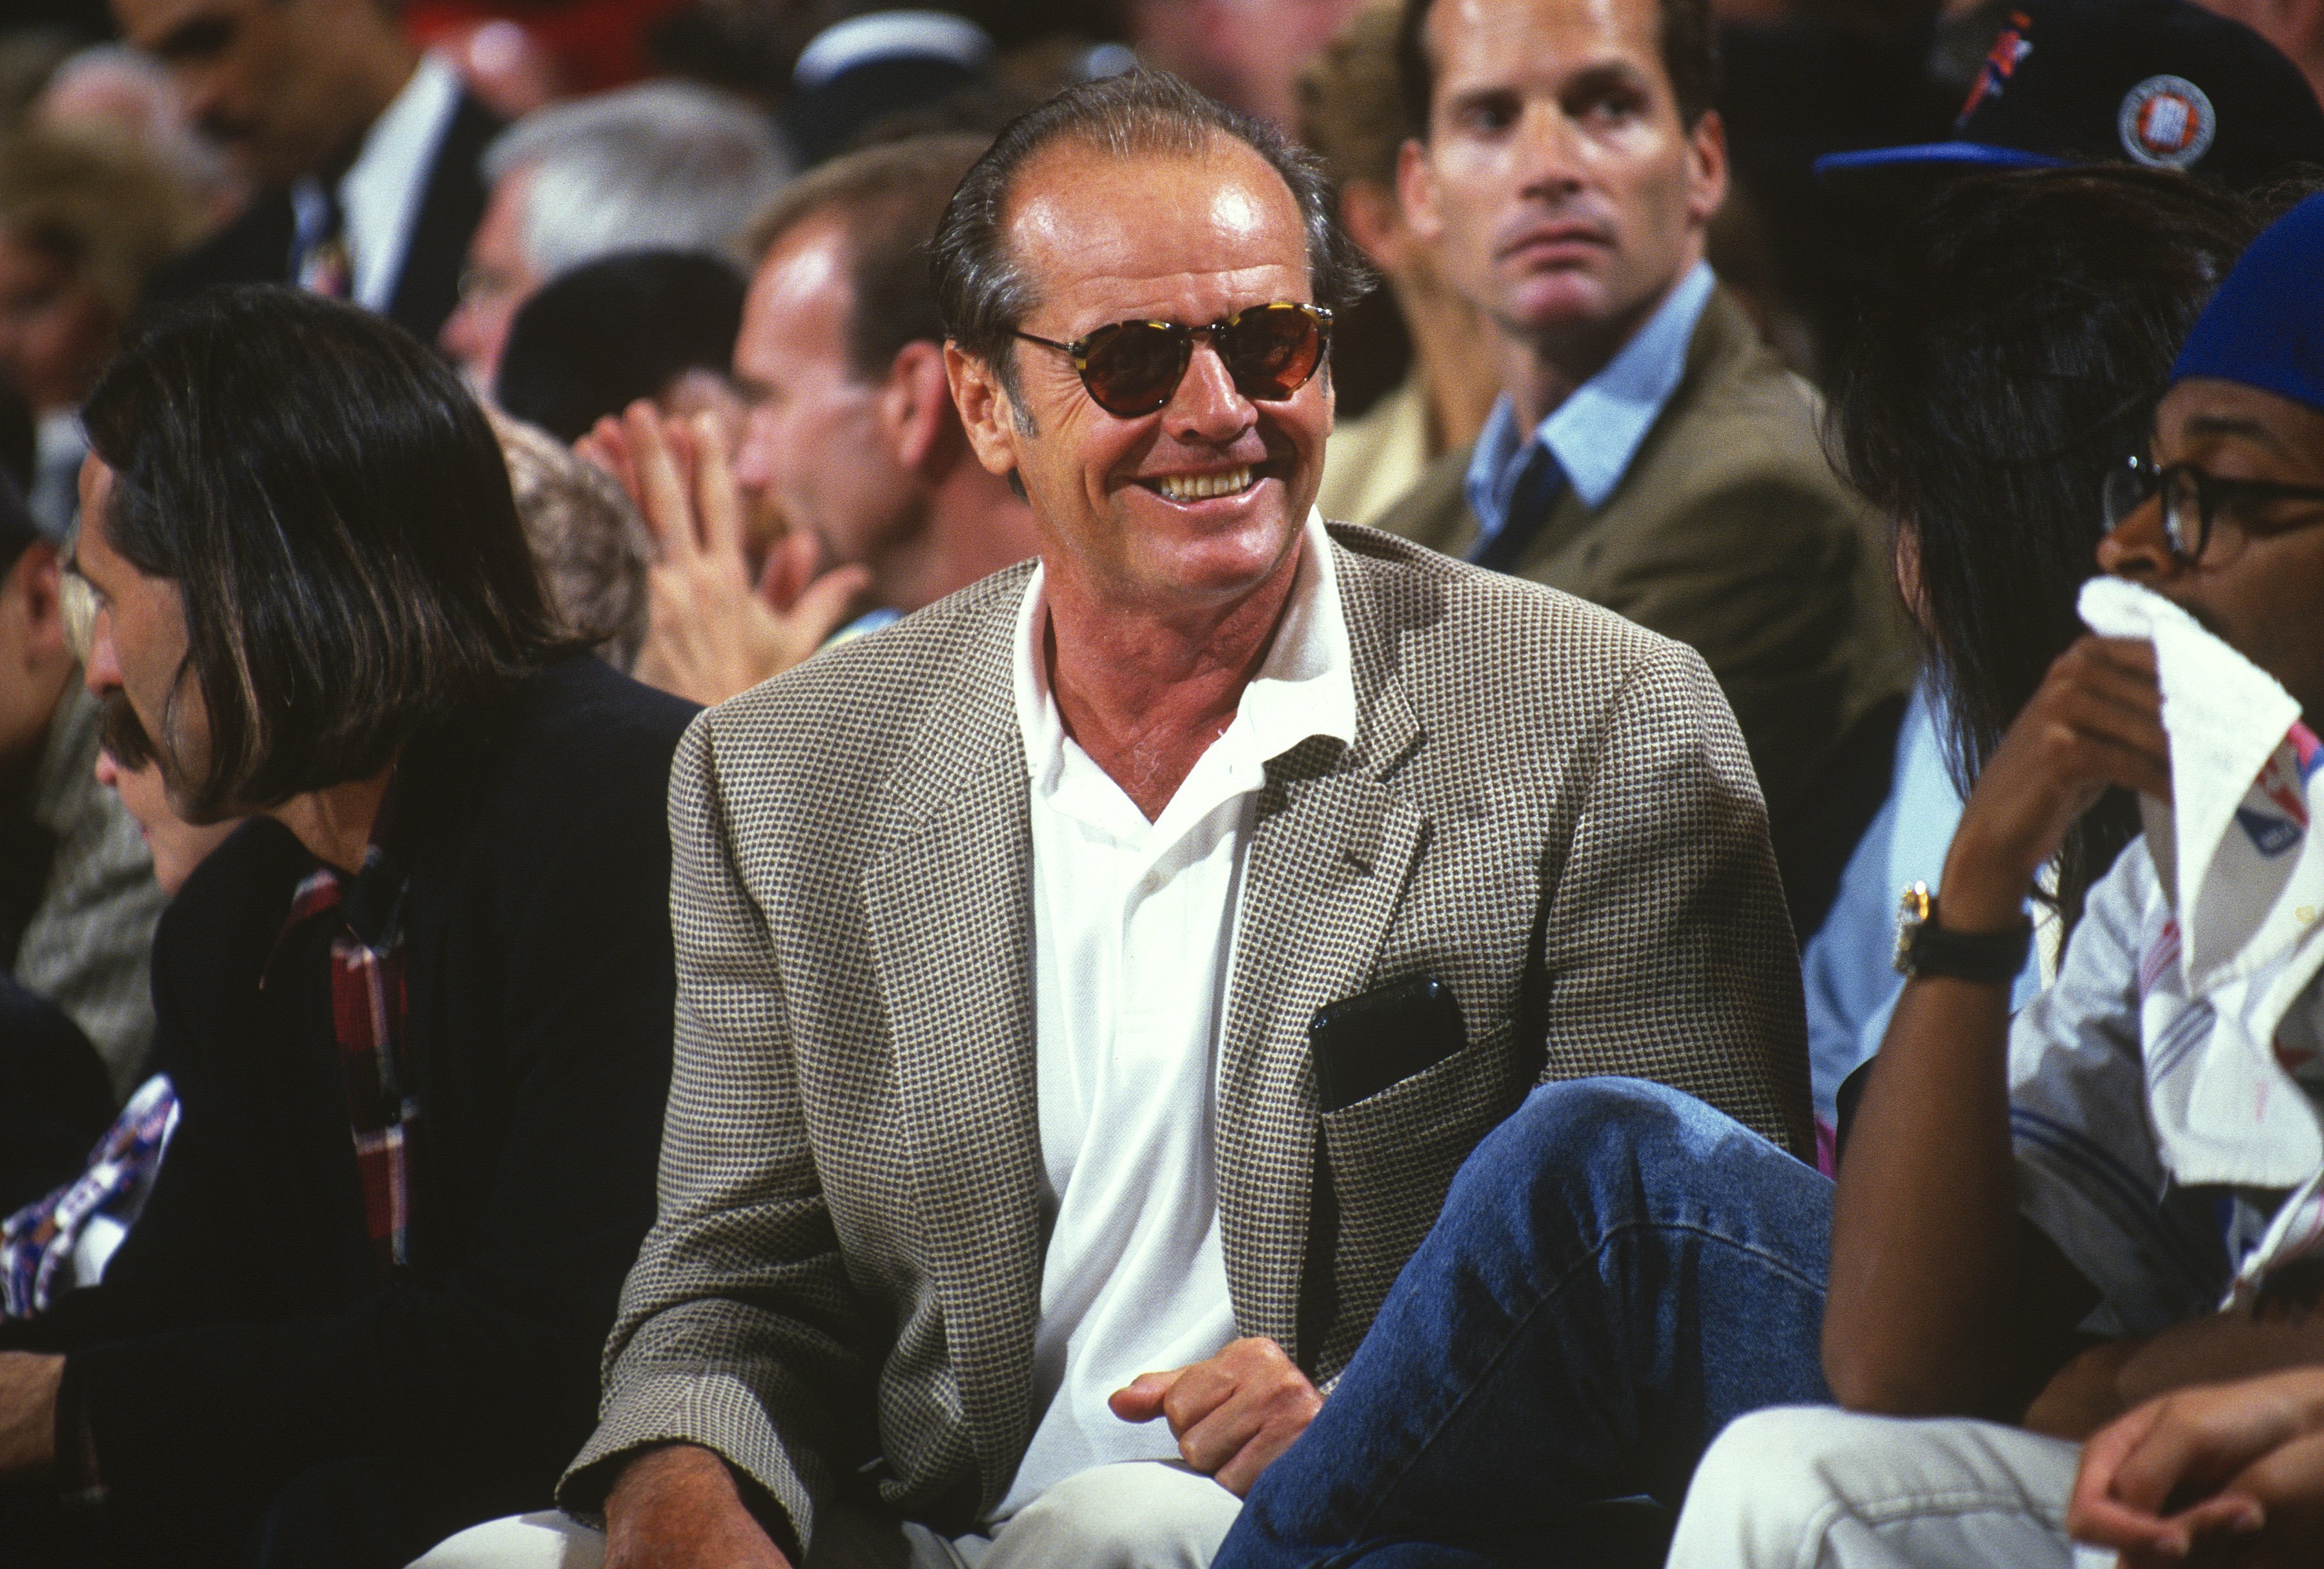 Jack Nicholson looks on during the 1994 NBA Finals at Madison Square Garden in the Manhattan Borough of New York City. | Source: Getty Images.